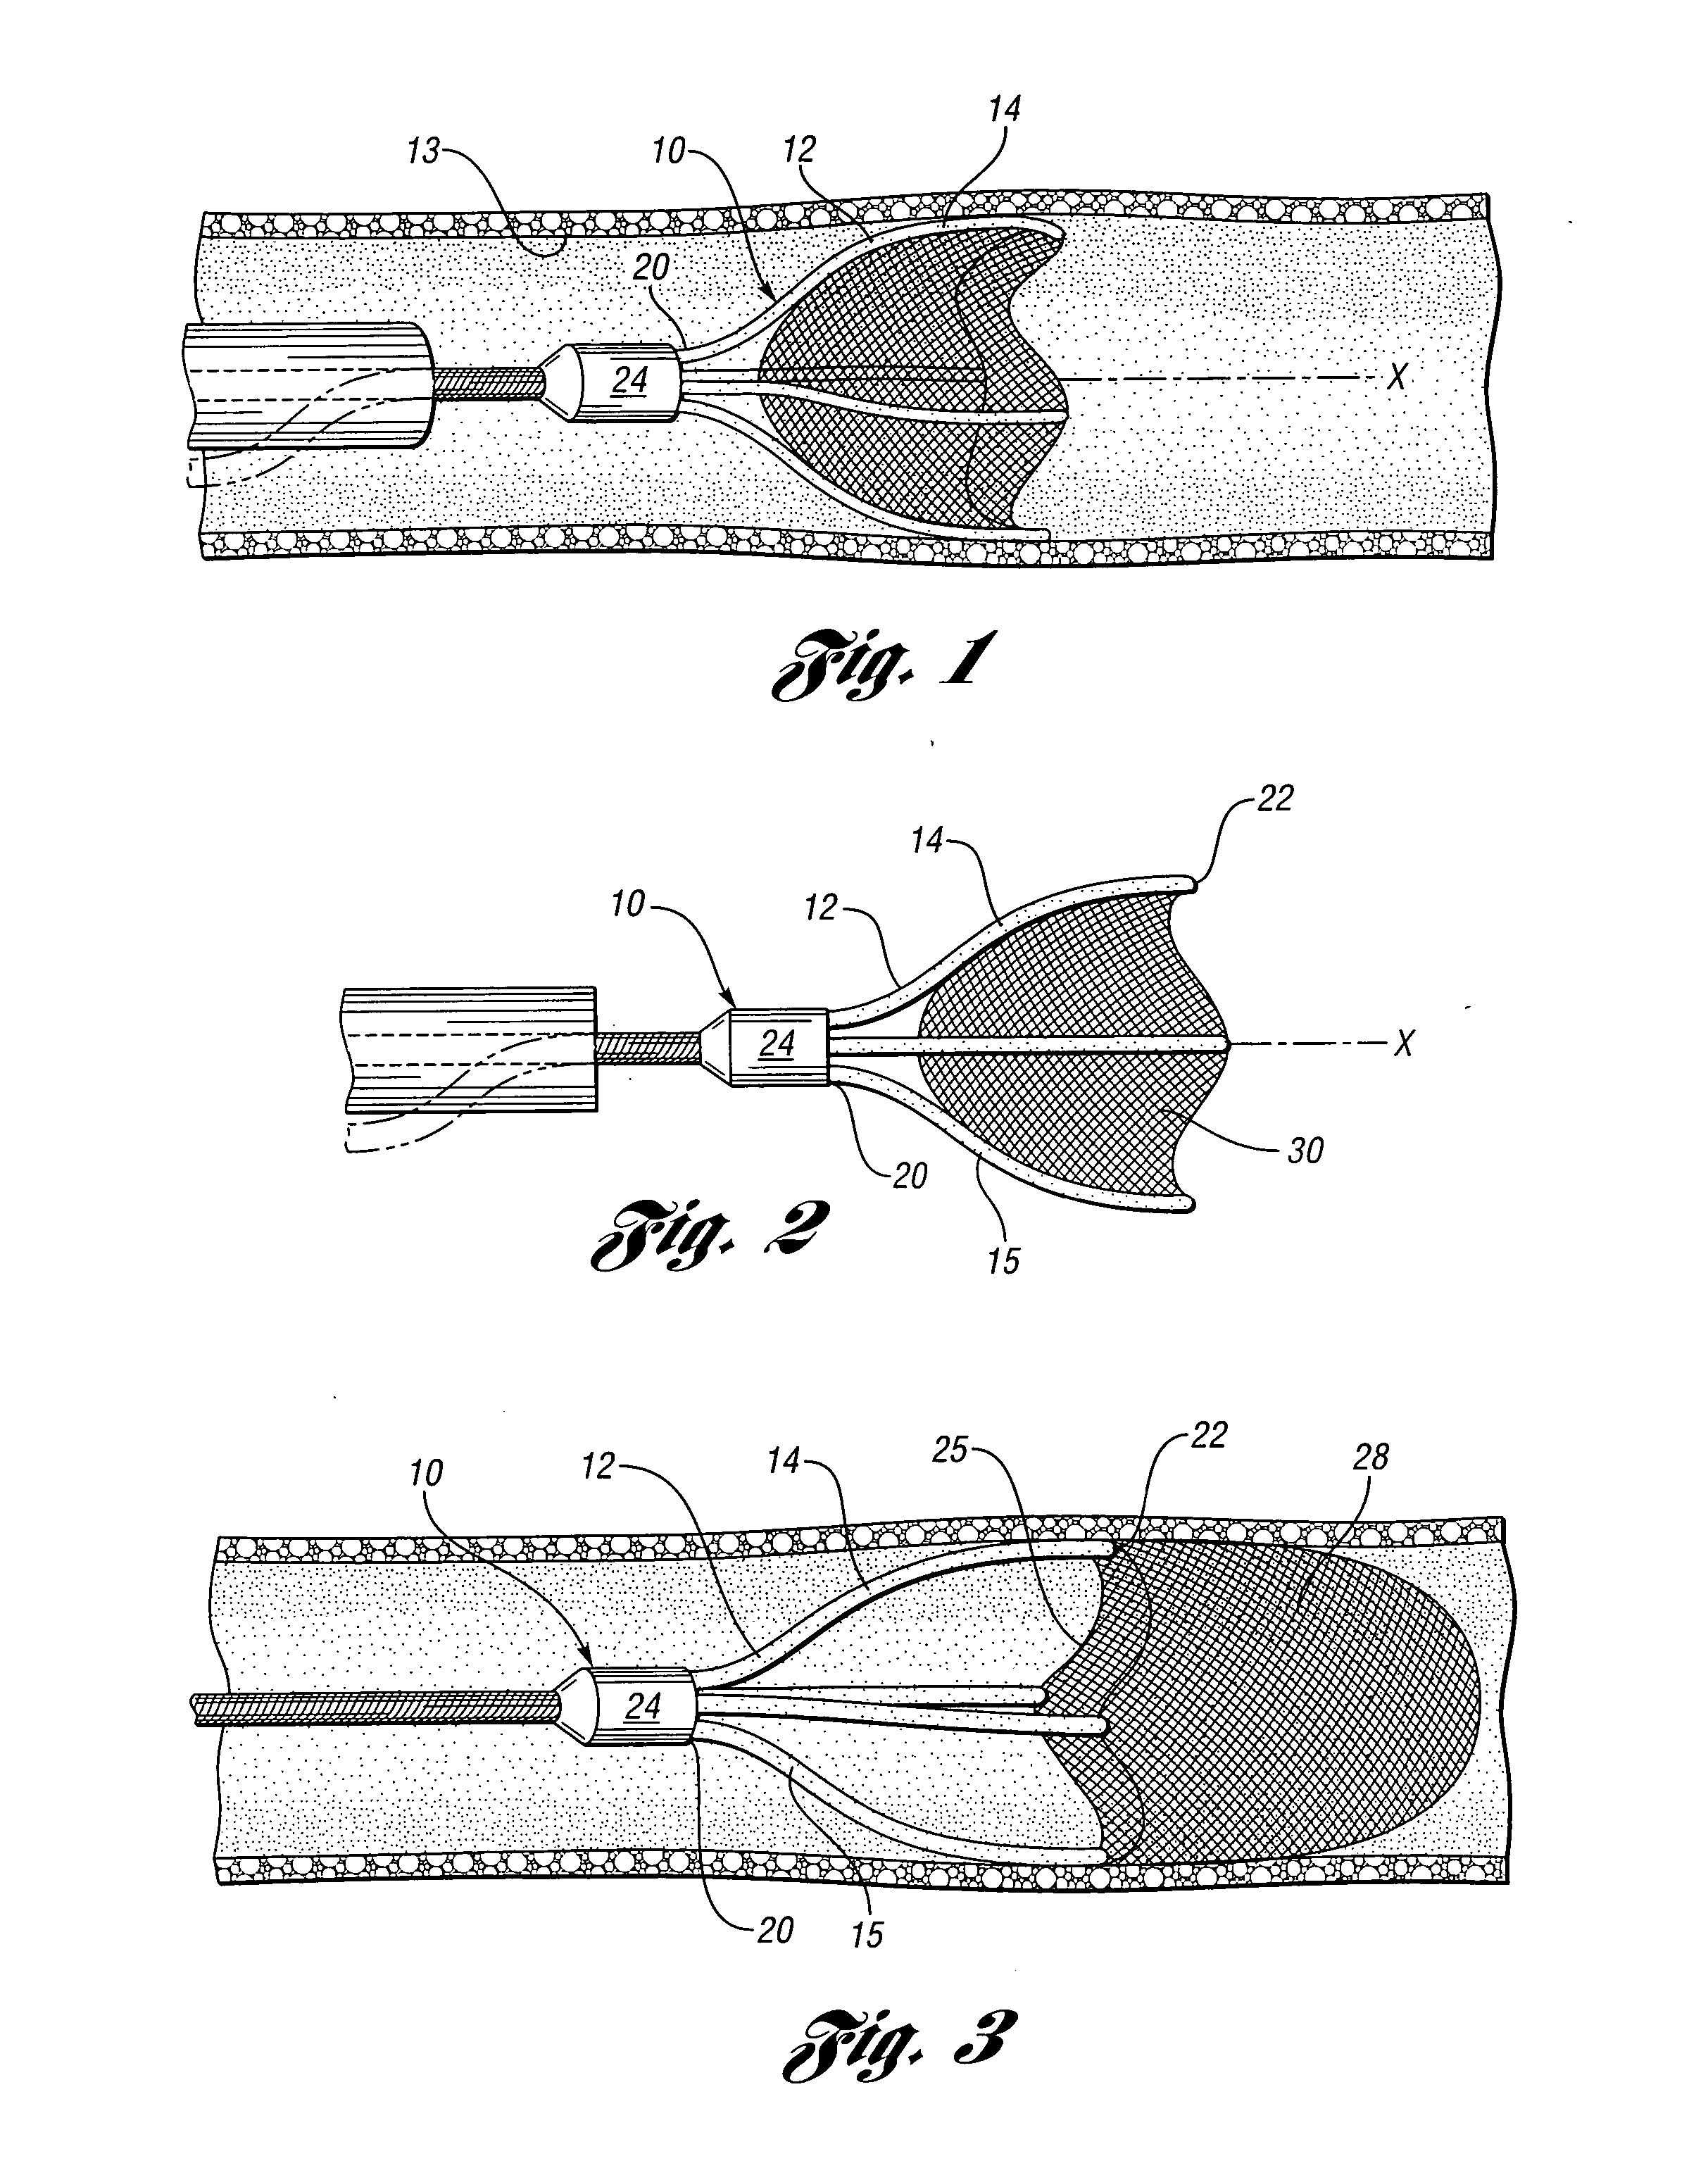 Embolic protection device having a filter